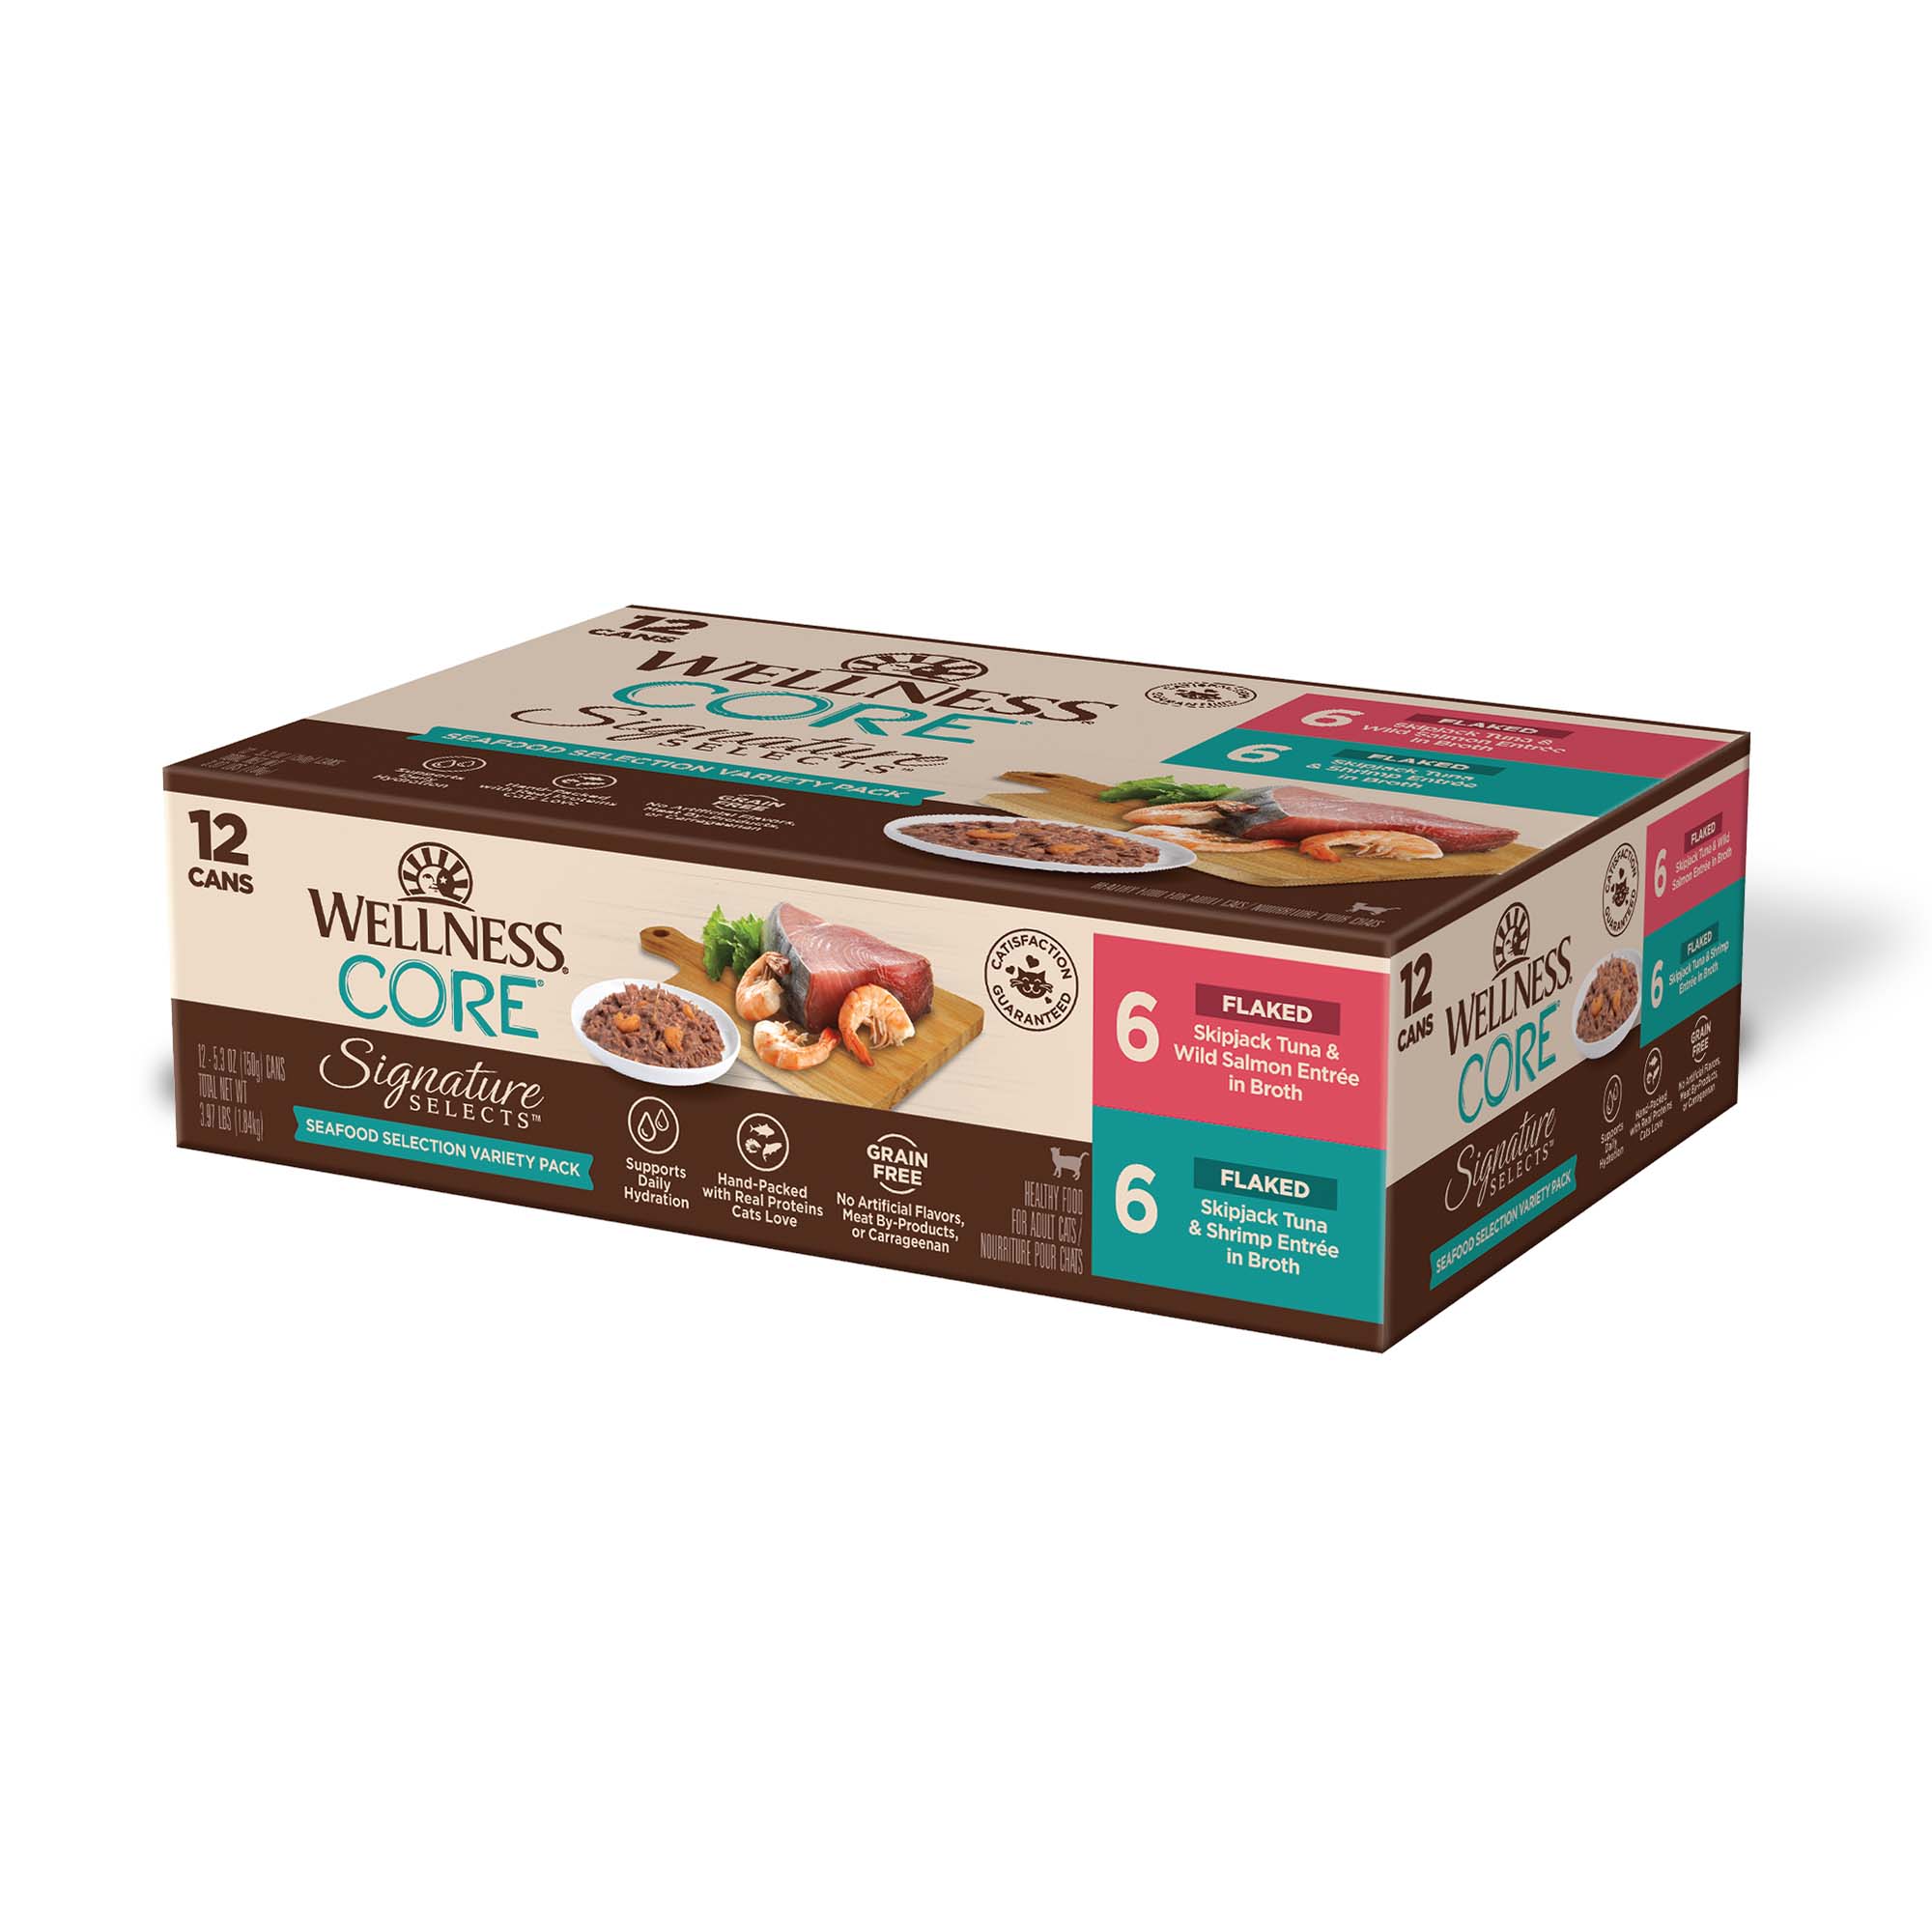 Wellness CORE Signature Selects Seafood Variety Pack